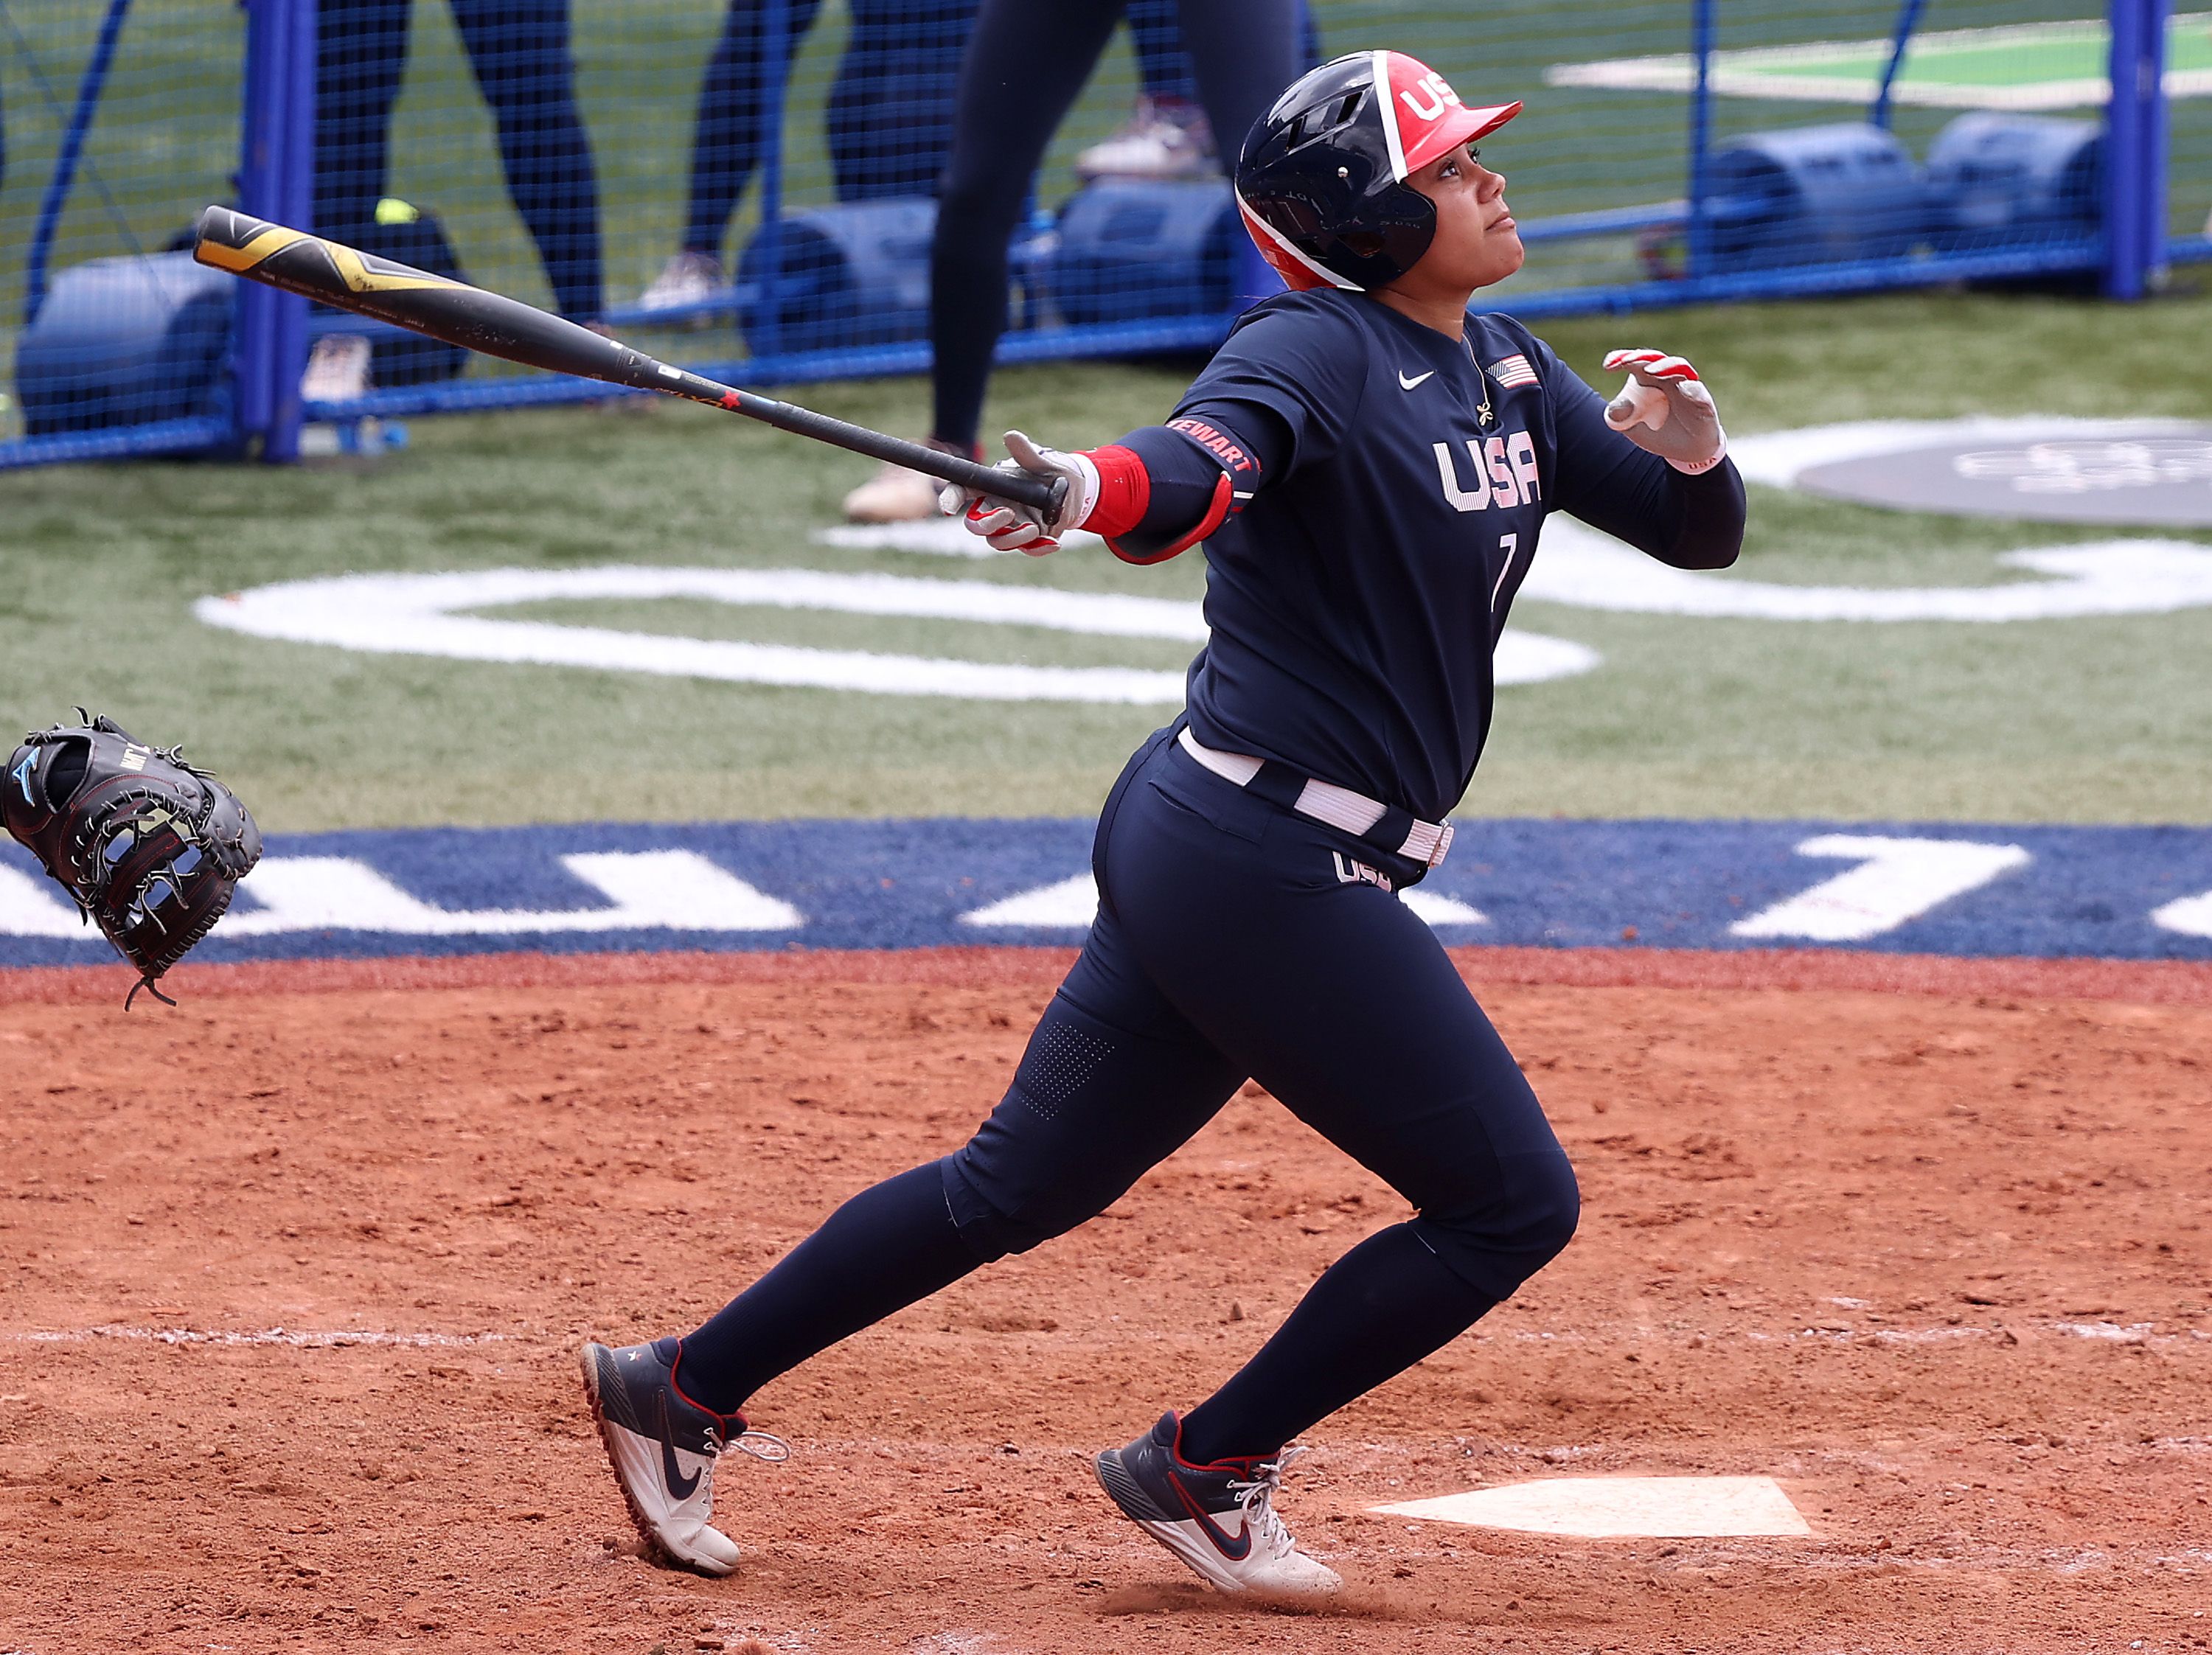 Kelsey Stewart #7 of the U.S. hits a walk-off home run to win the game 2-1 in the seventh inning against Team Japan during softball opening round on day three of the Tokyo 2020 Olympic Games